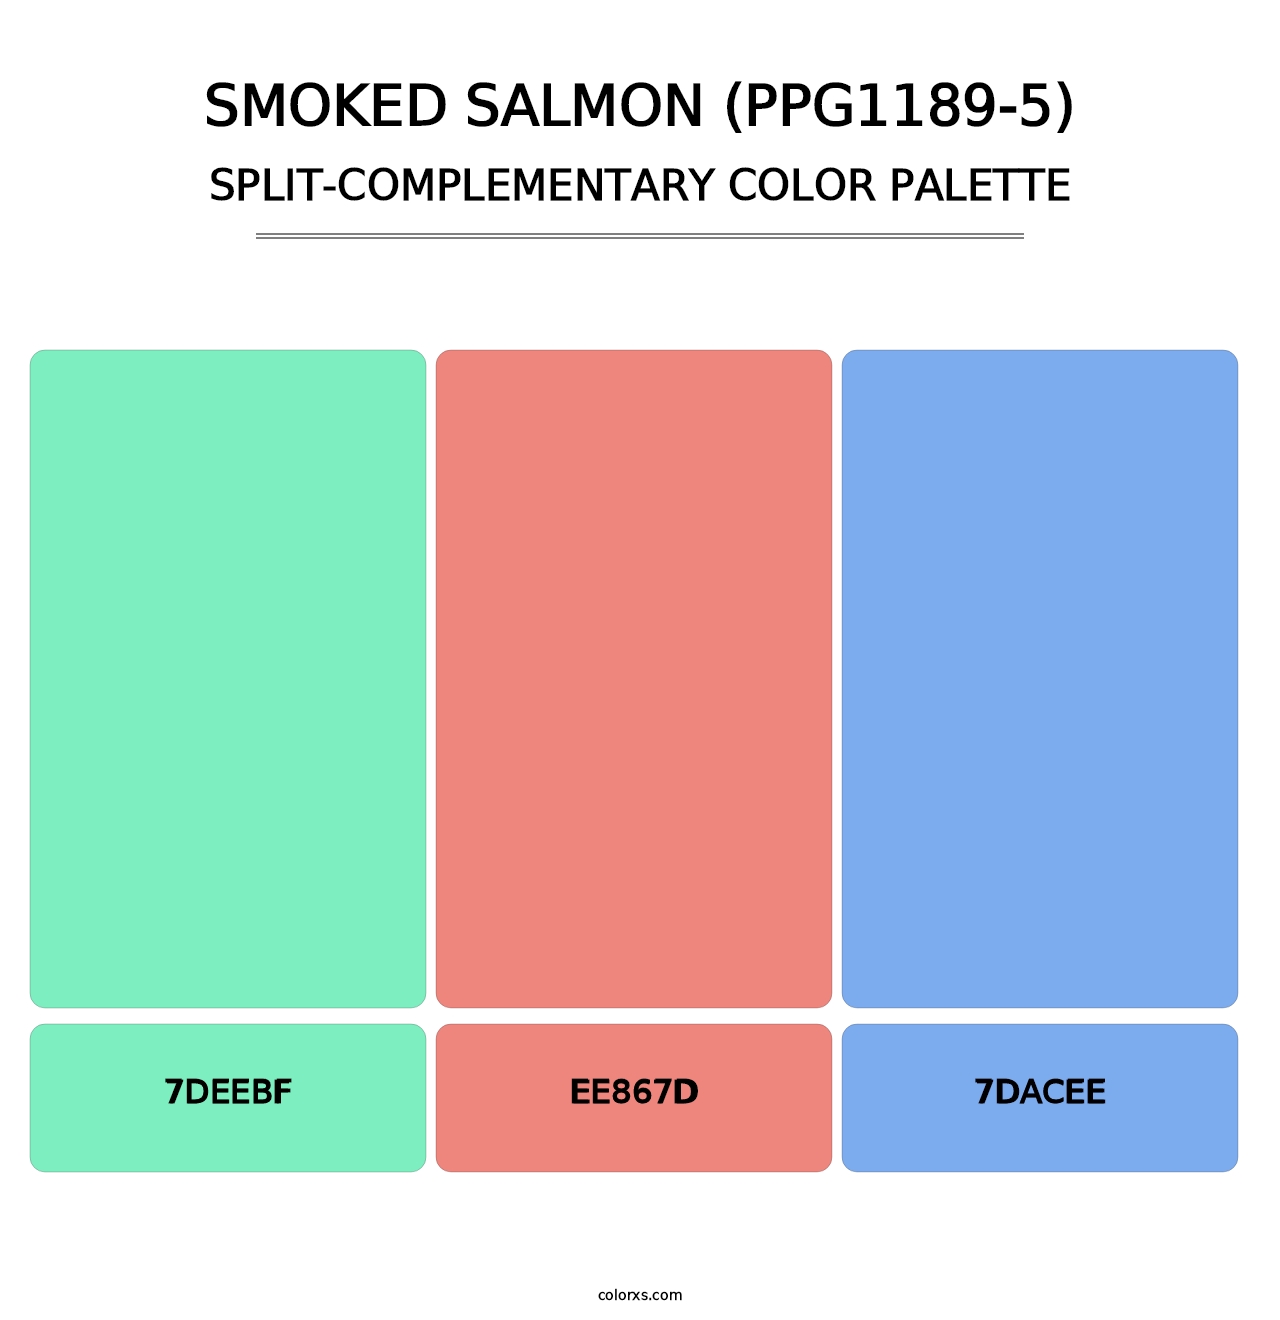 Smoked Salmon (PPG1189-5) - Split-Complementary Color Palette